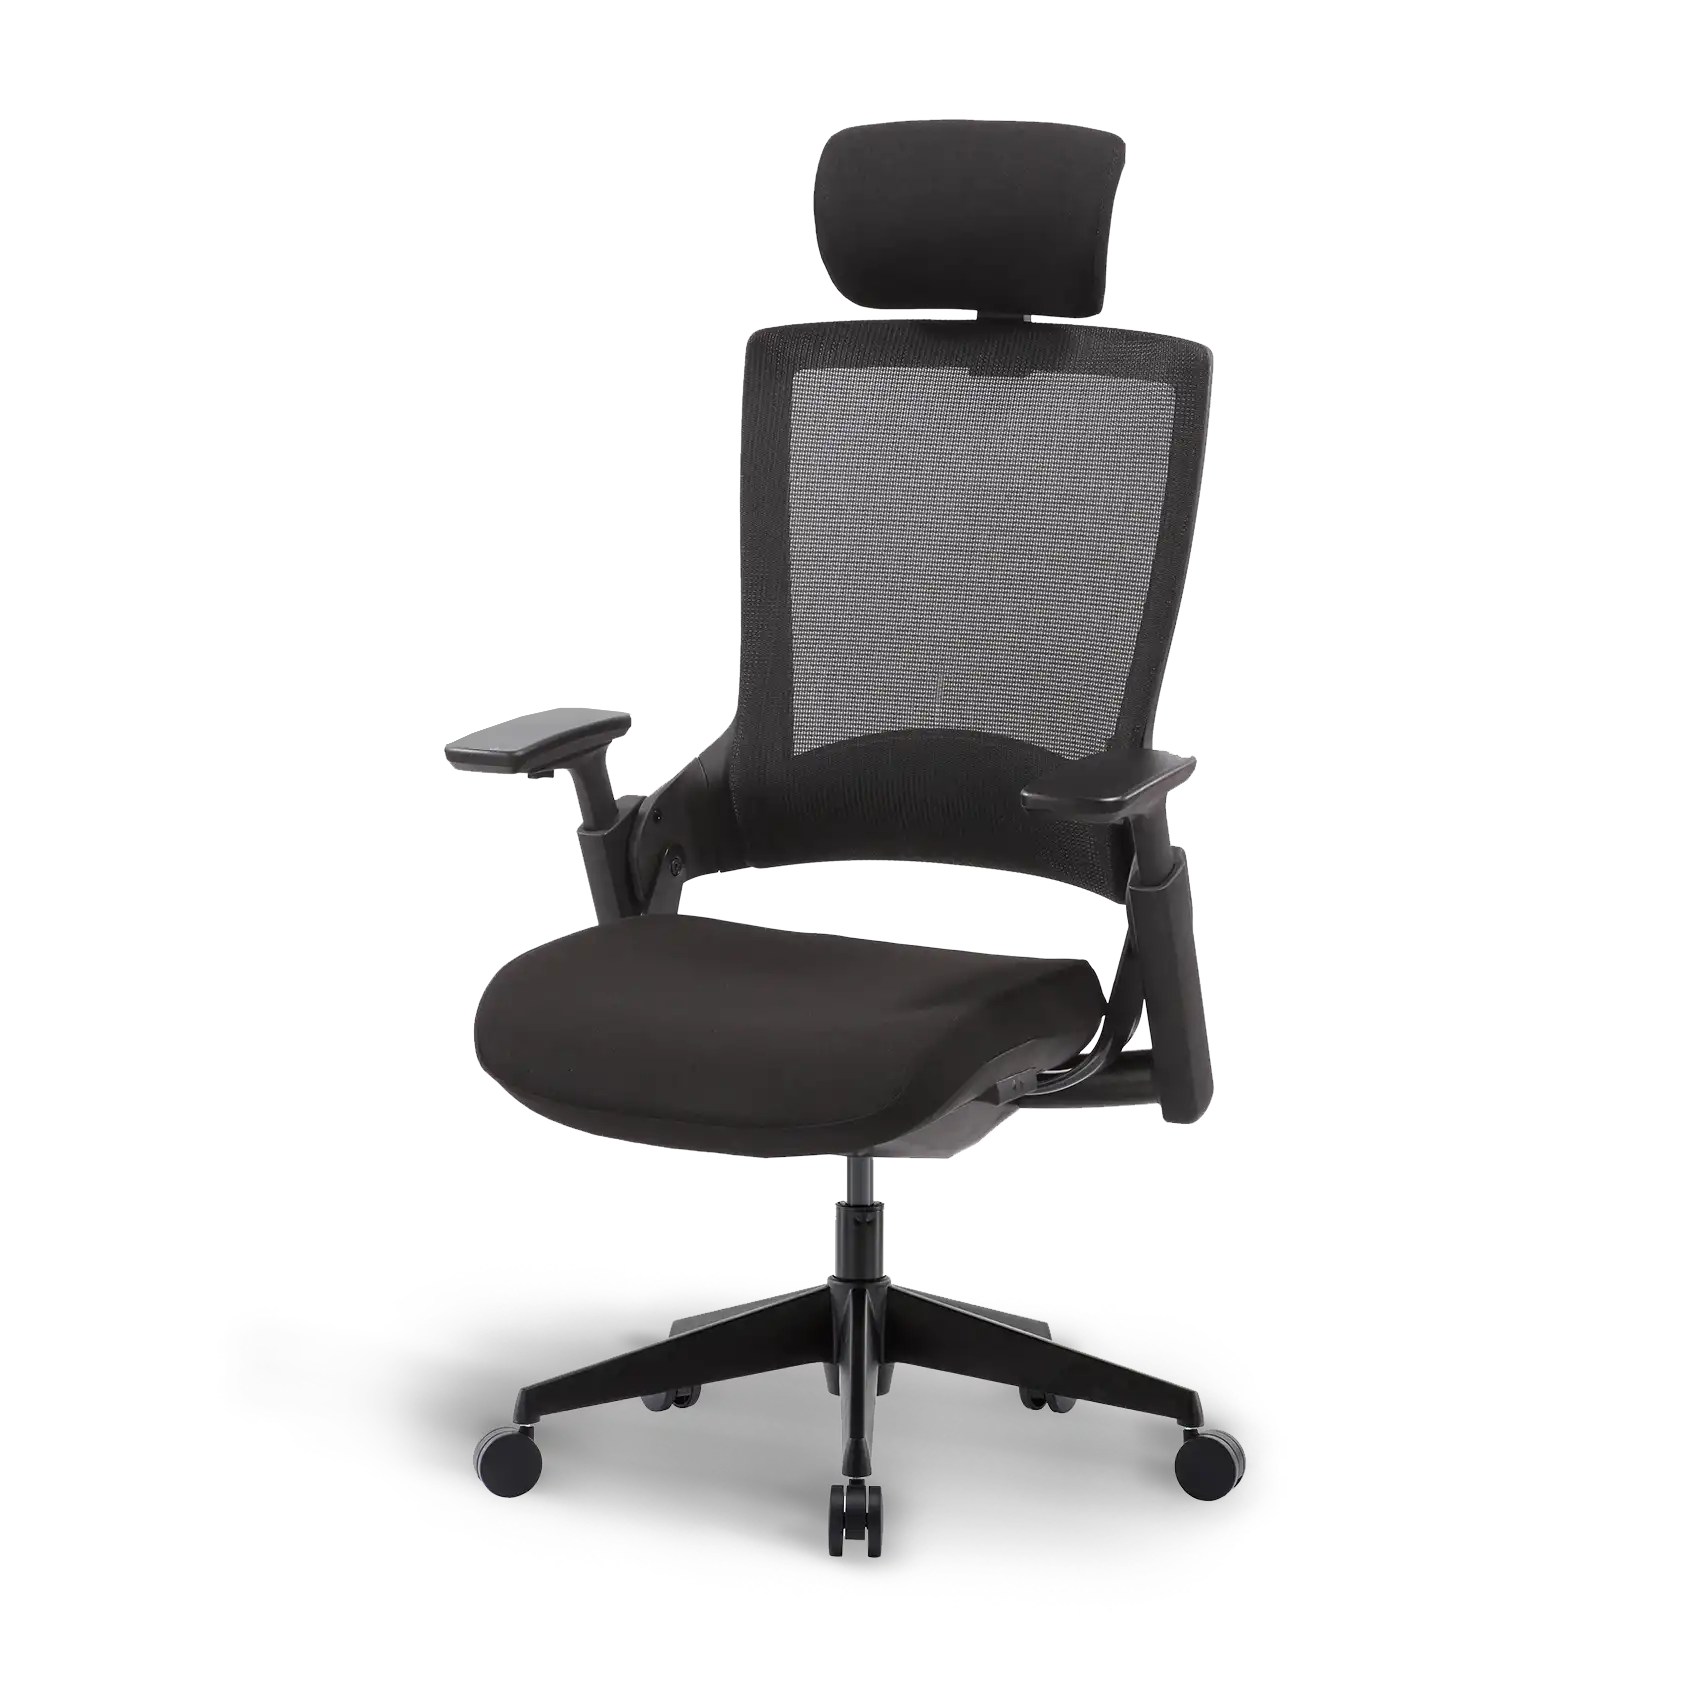 Flujo Angulo ergonomic office chair in black with adjustable armrests